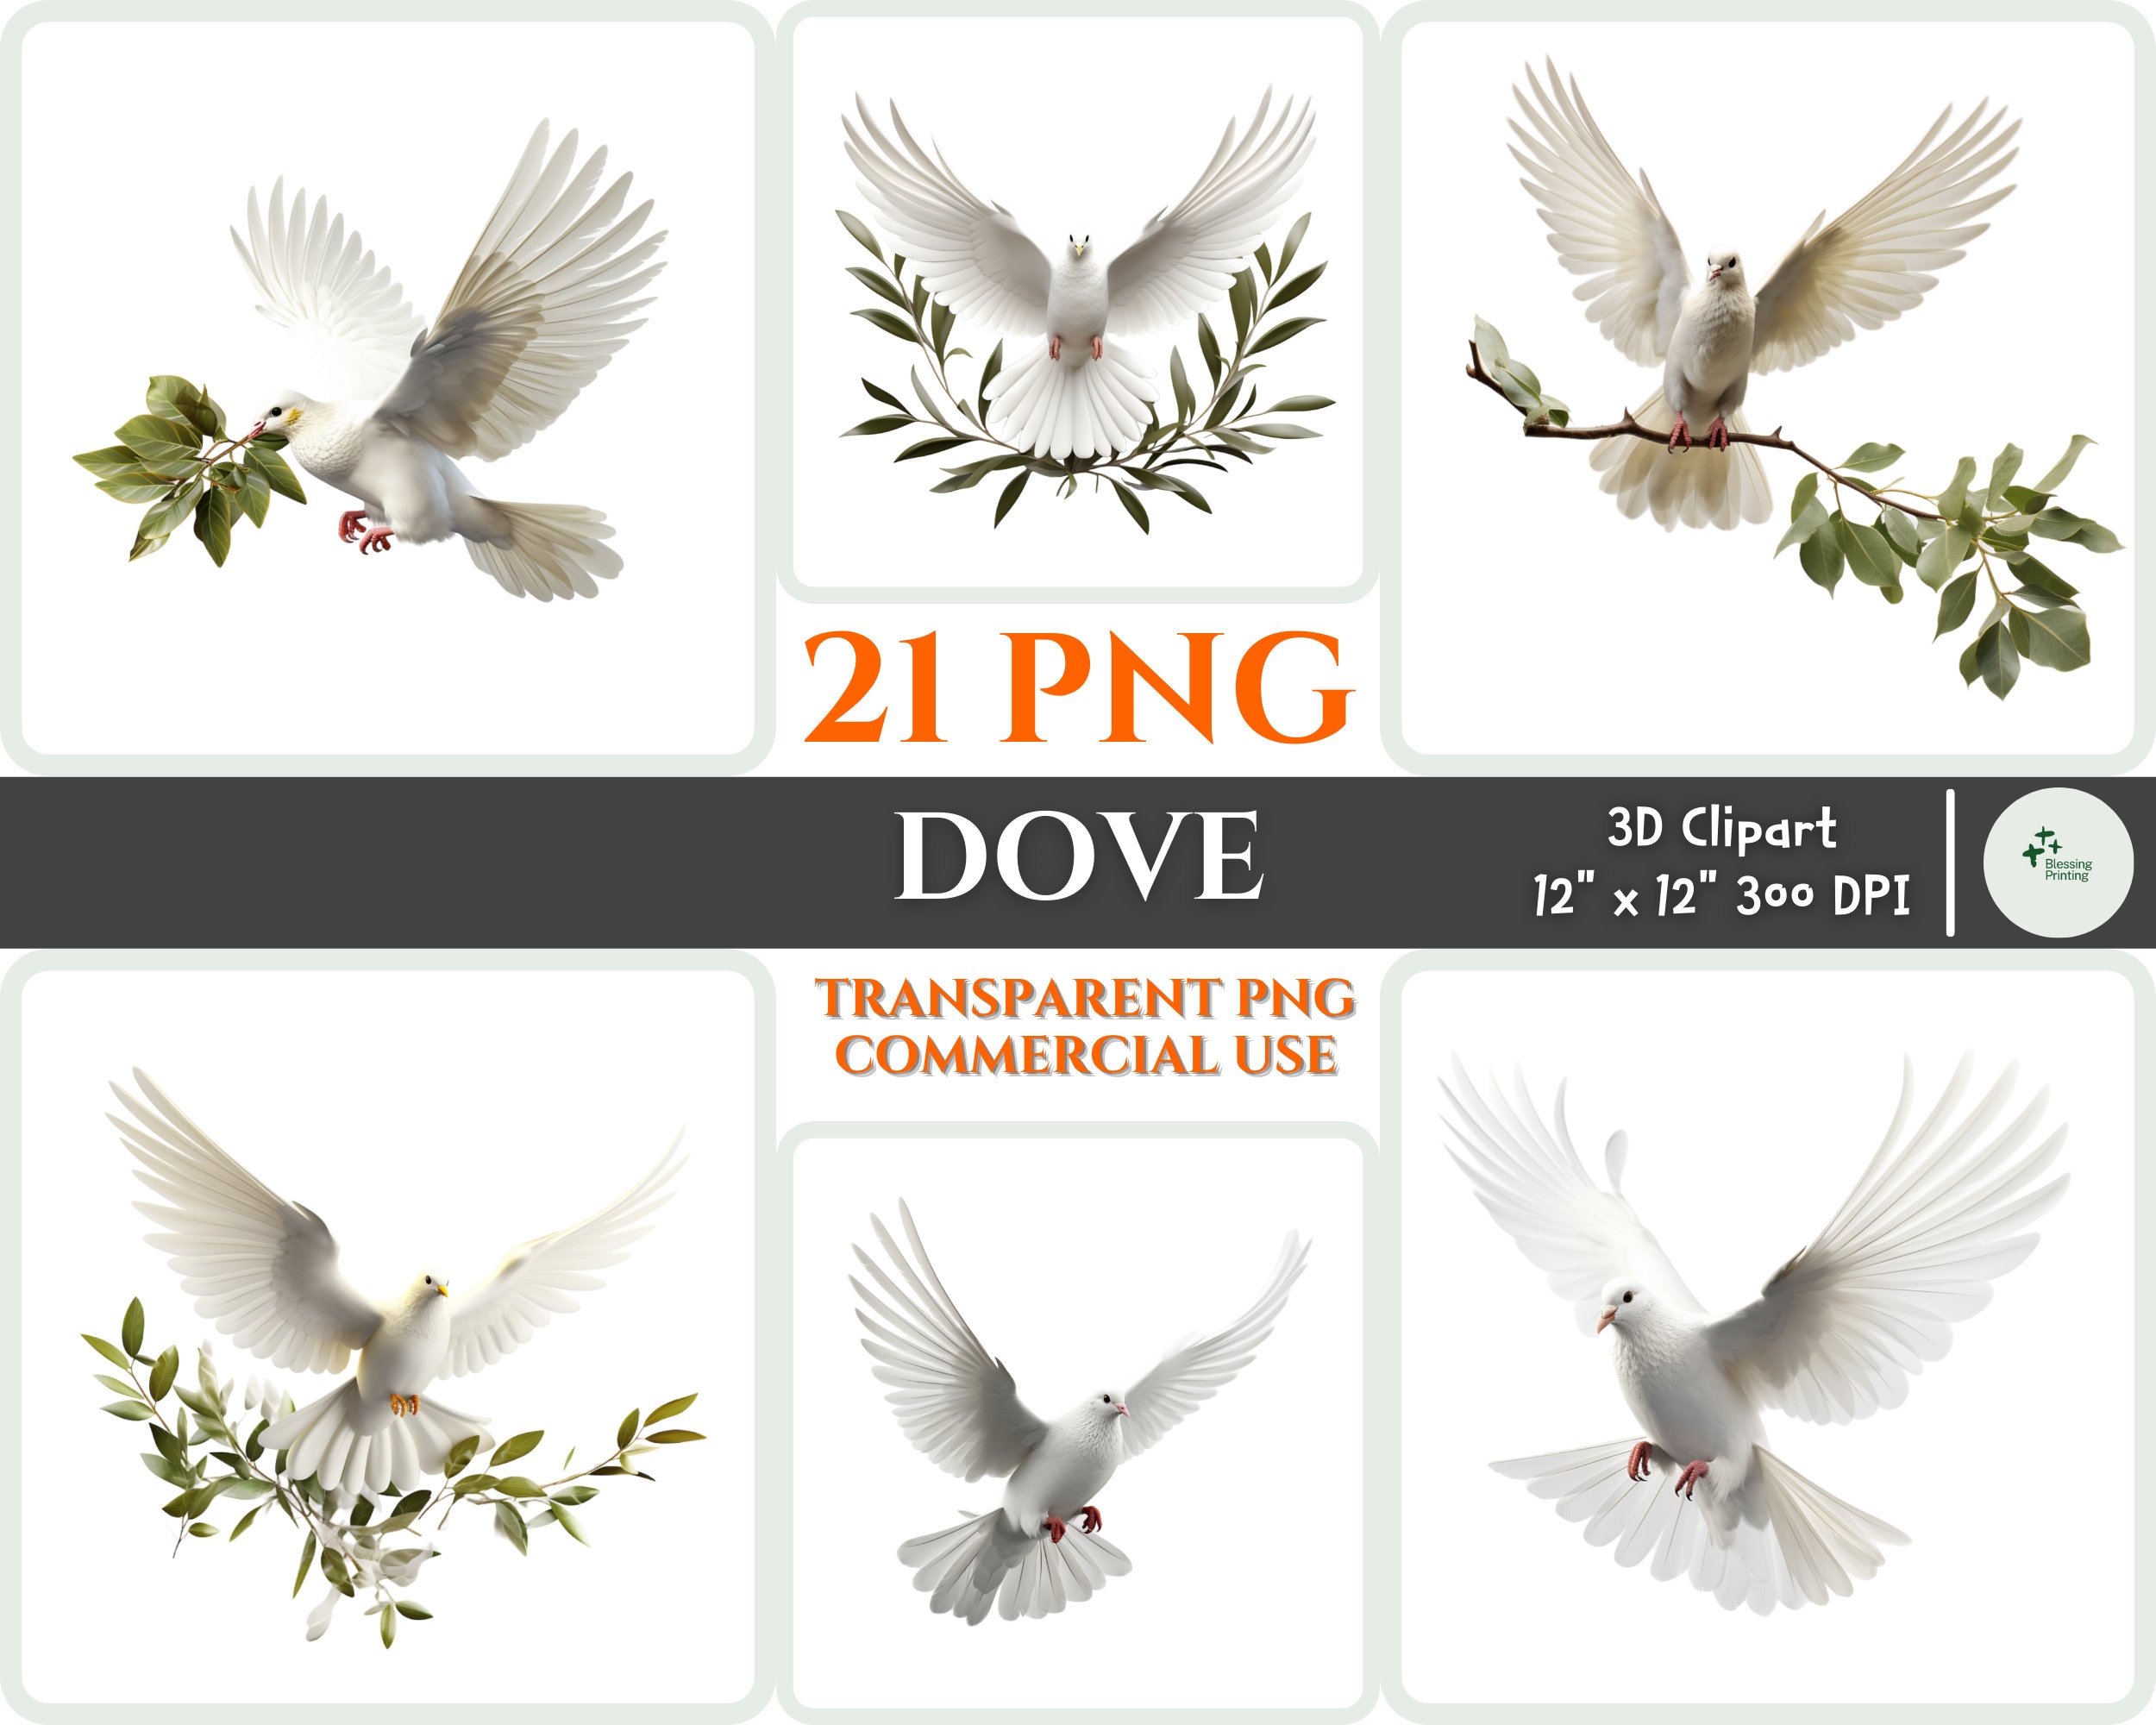 3D Doves and Sky Ladder Waterproof Durable and Eco-friendly